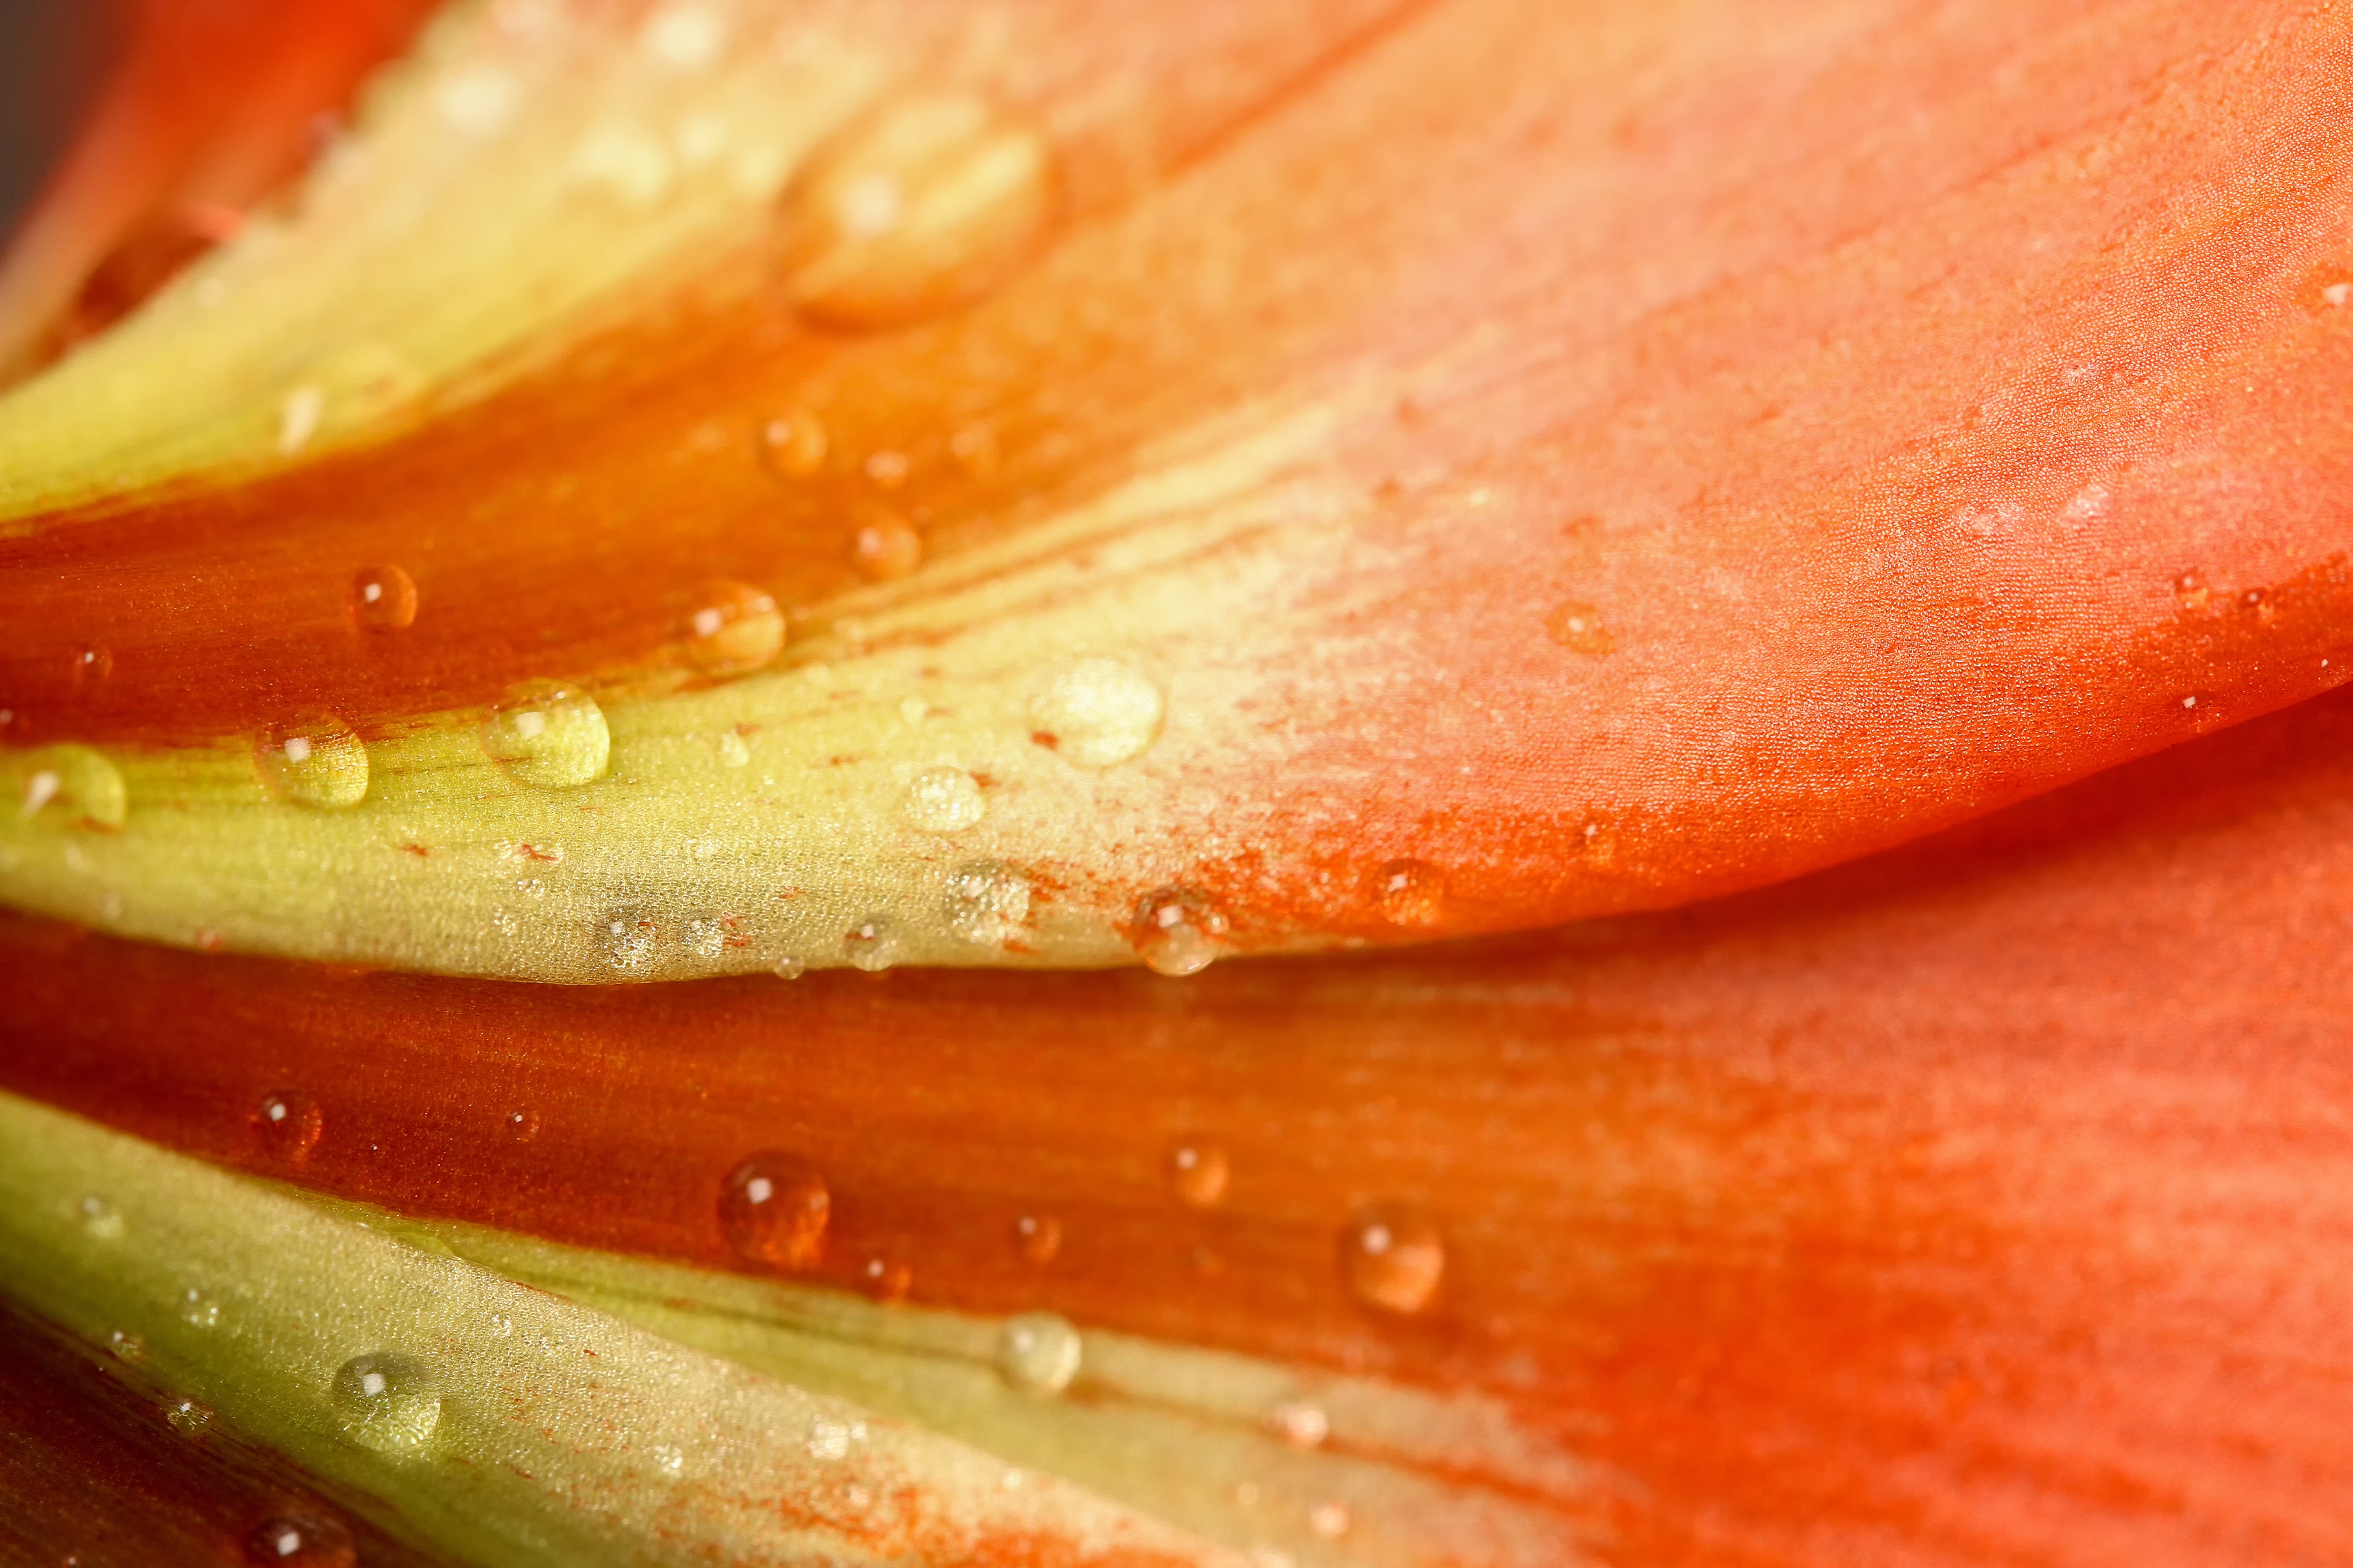 Droplets on the flower photo